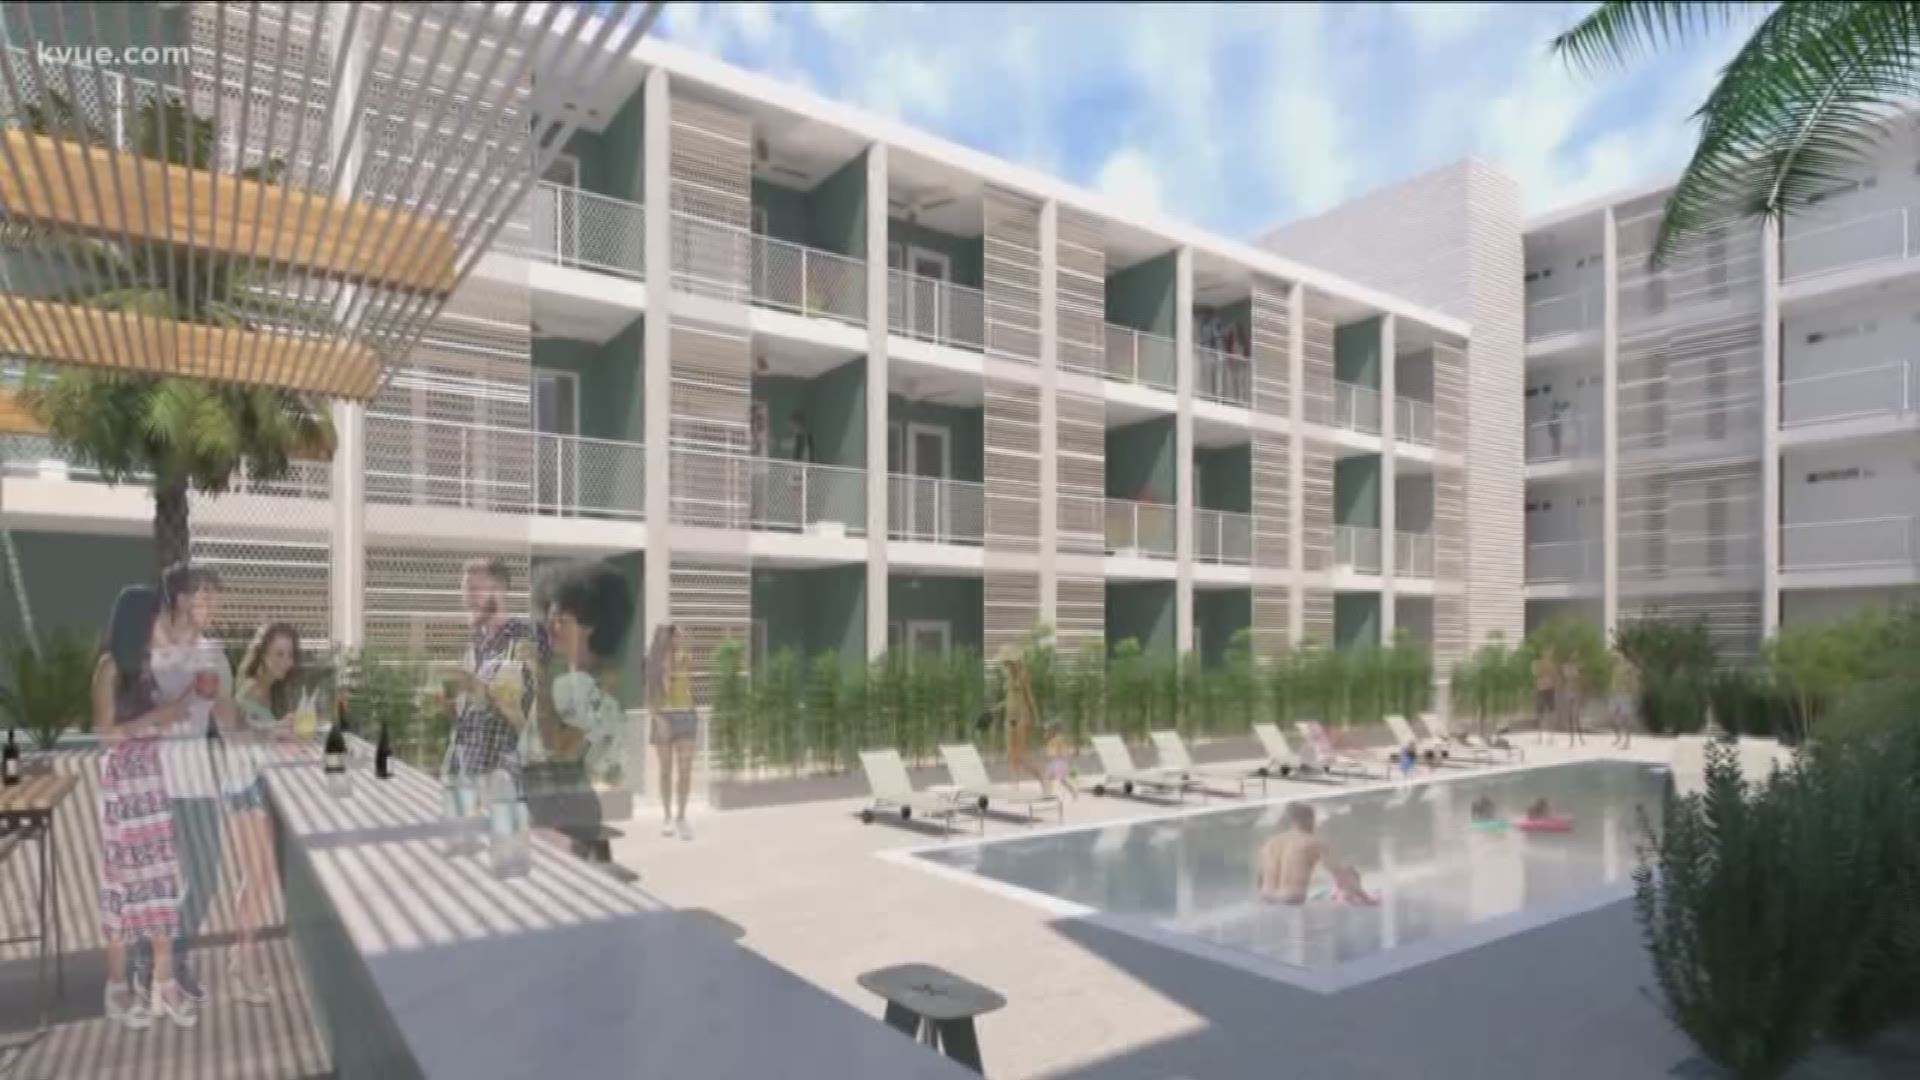 In addition to a billion dollar tech company, a new boutique hotel will be setting up shop in East Austin.